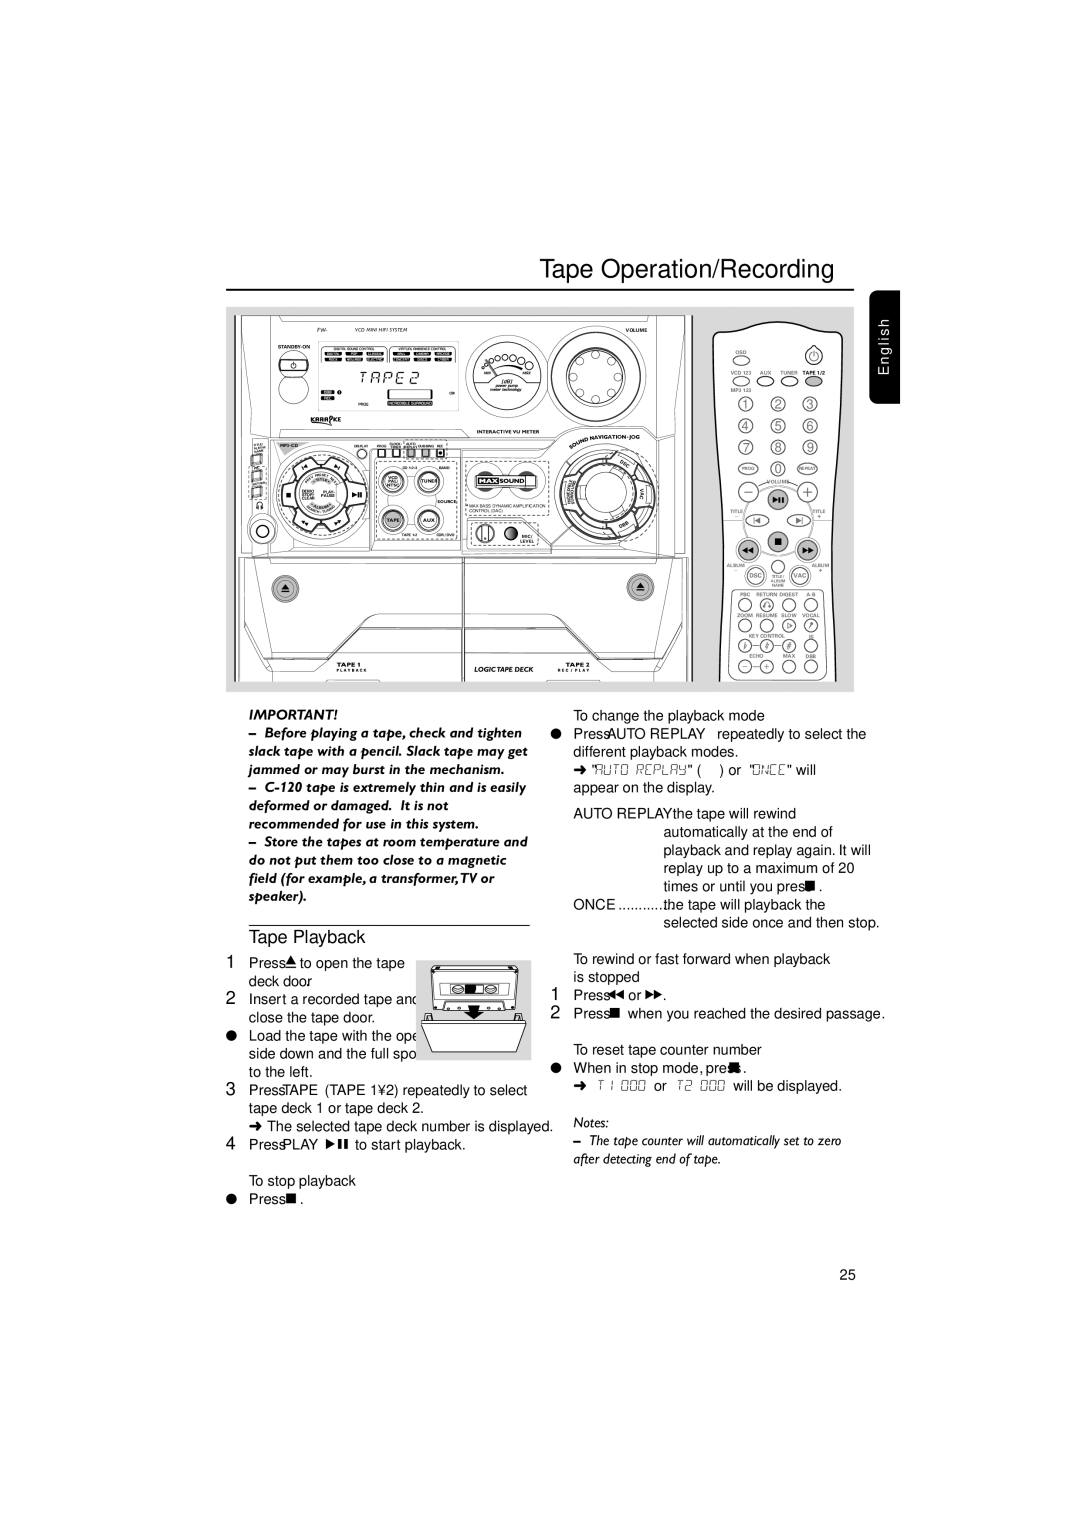 Philips FWV537 manual Tape Operation/Recording, Tape Playback, To change the playback mode, To reset tape counter number 